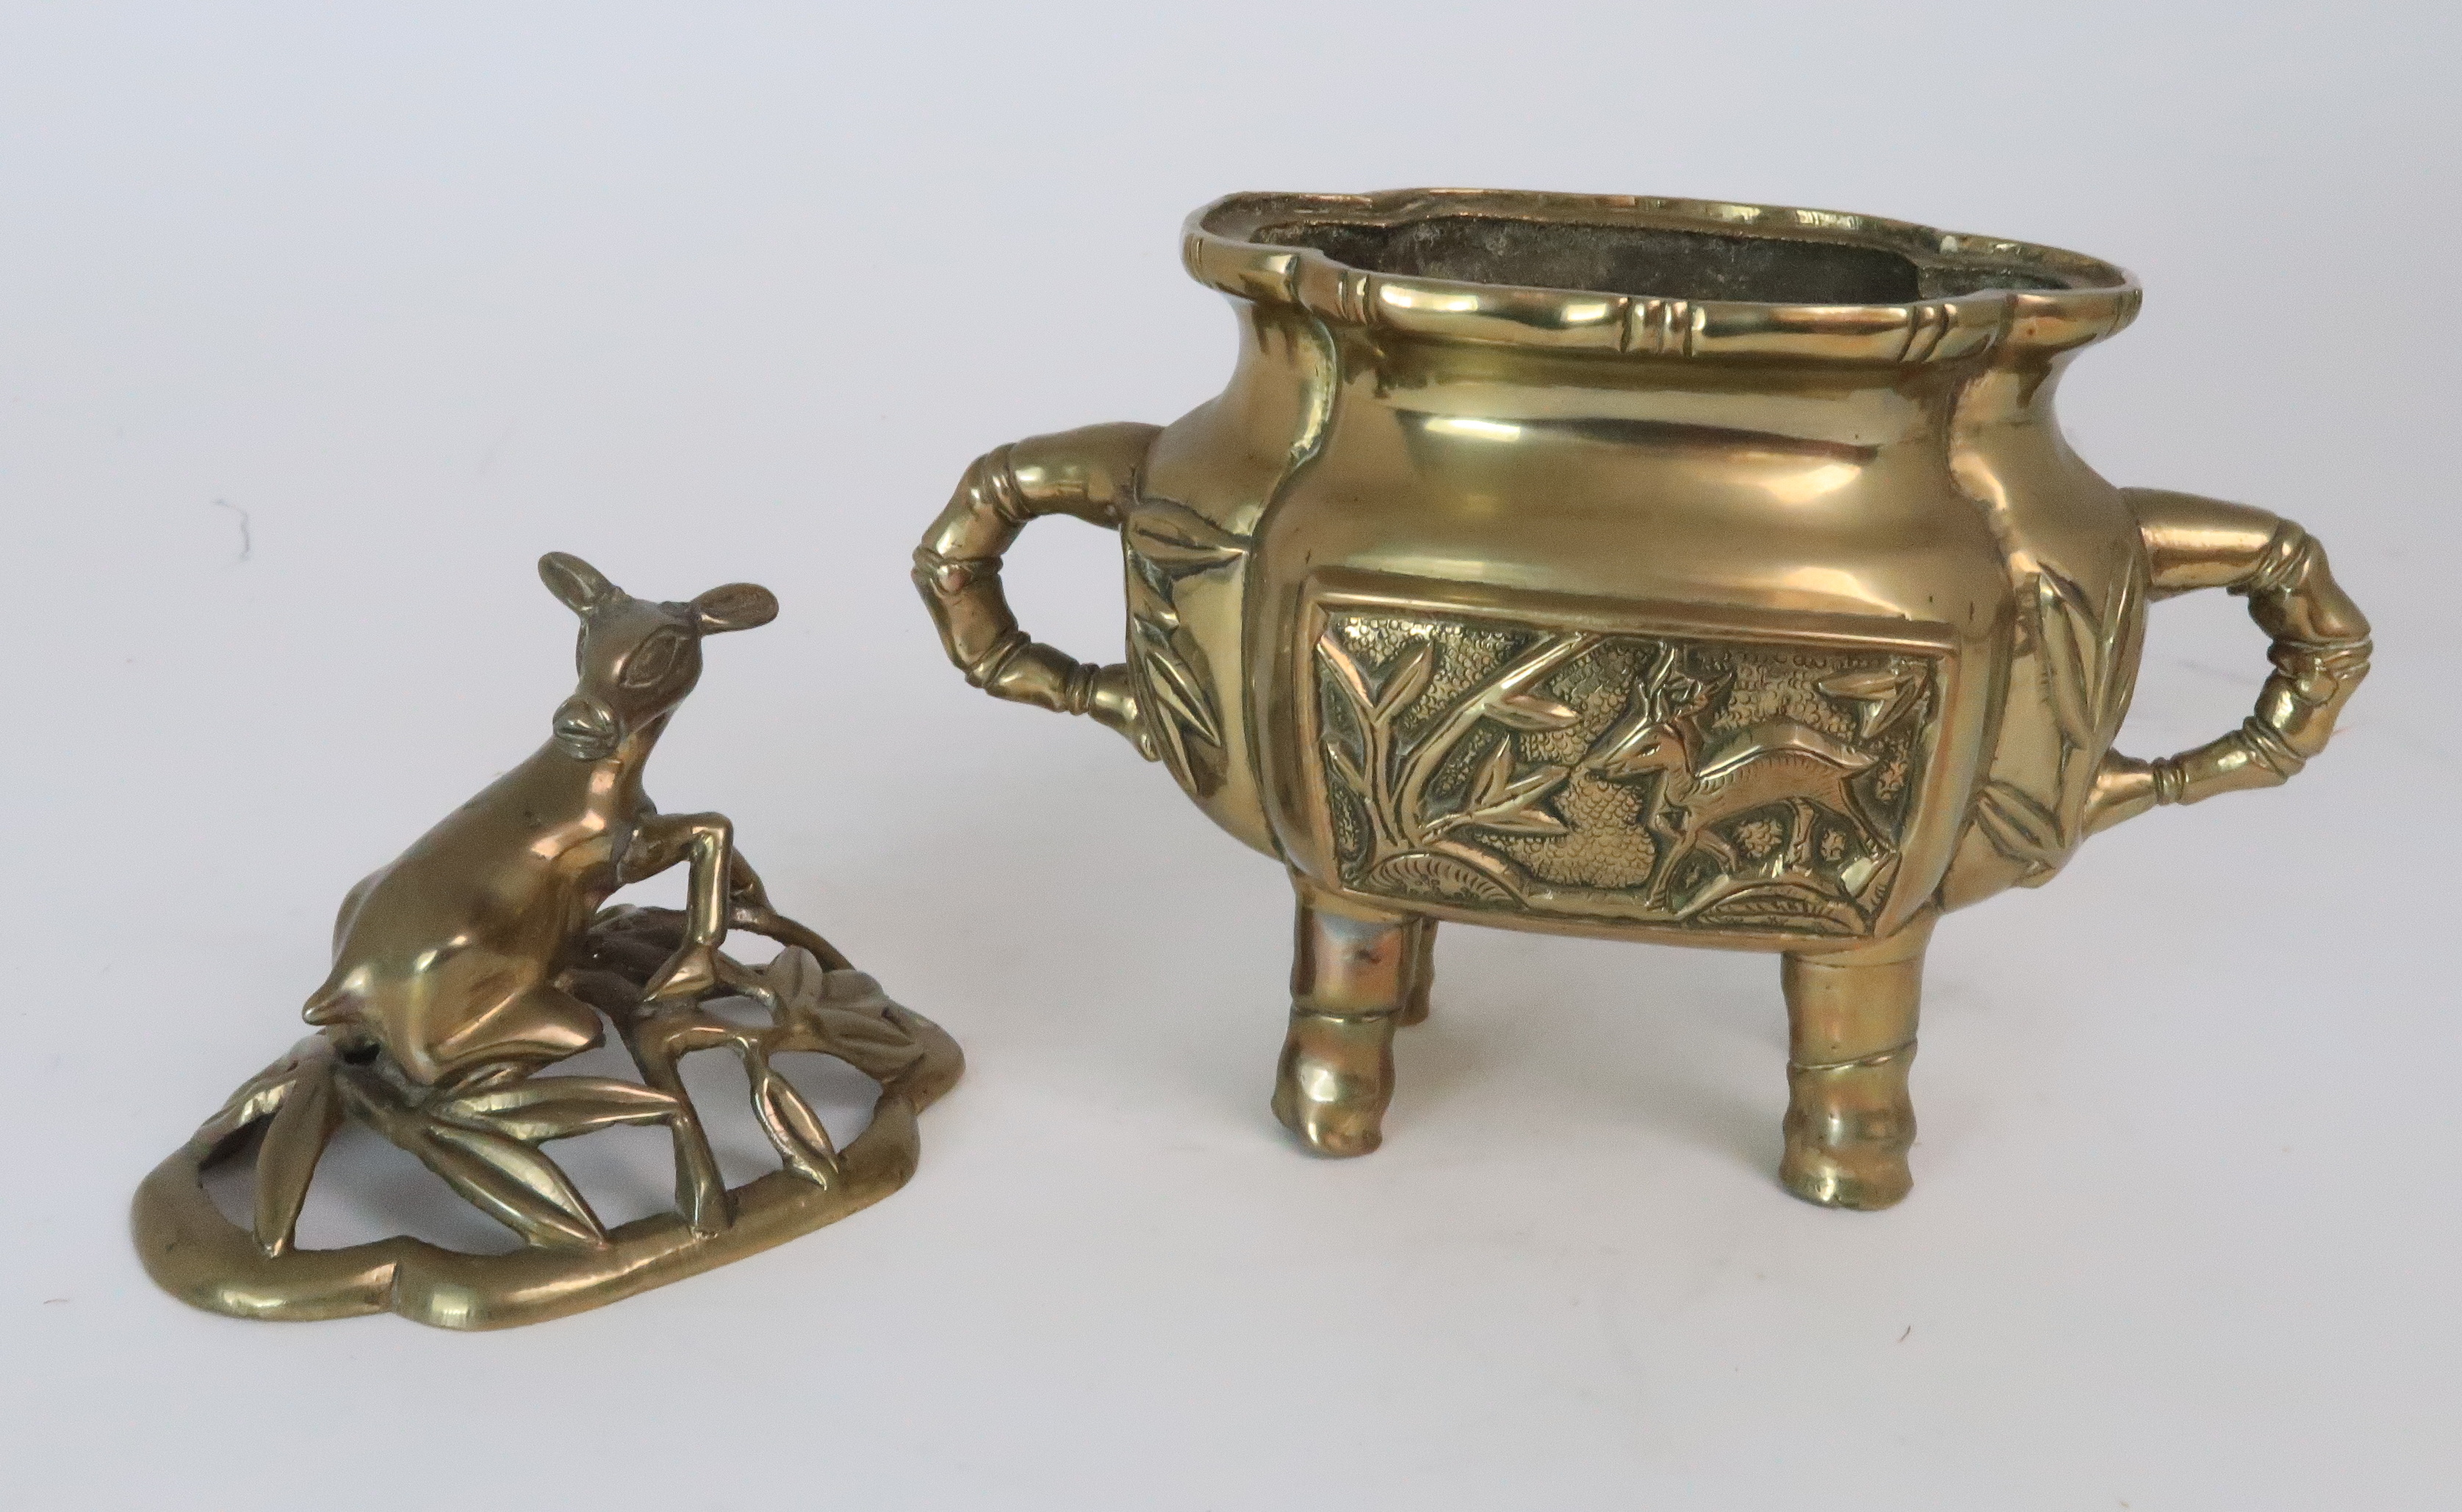 *WITHDRAWN* A CHINESE BRASS CENSOR AND OIERCED COVER cast with deer finial above panels of animals - Image 5 of 7